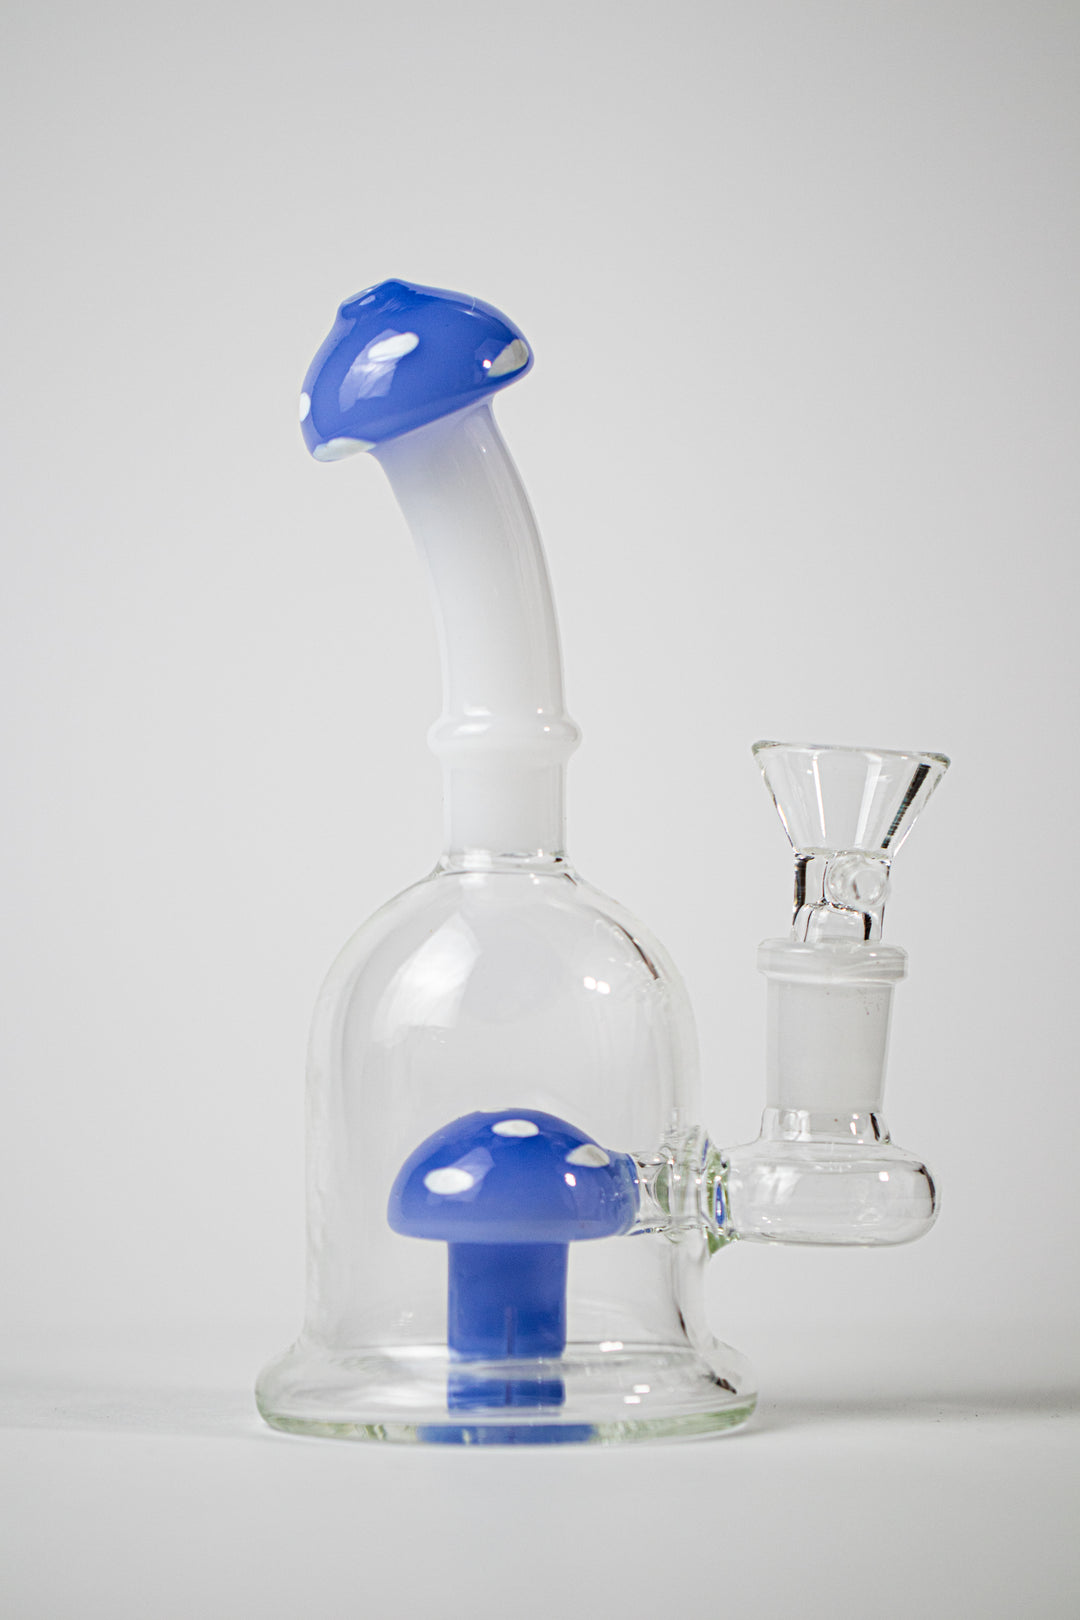  6-inch Mushroom Water Pipe with a blue mushroom mouth inhale opening long neck  unique mushroom-shaped shower head perc,versatility for herb or dabs includes:14mm weed bowl piece